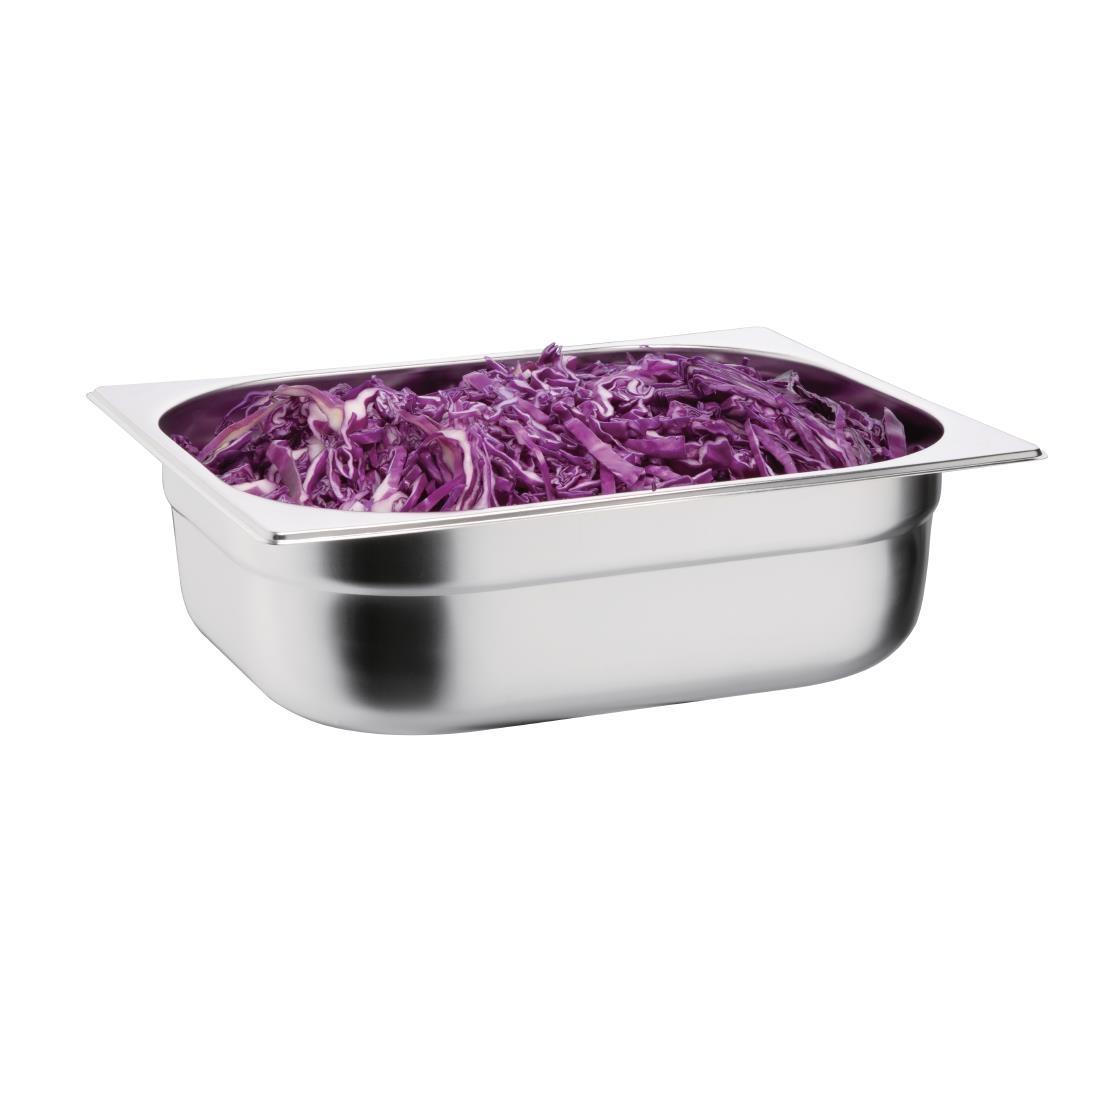 Vogue Stainless Steel 1/2 Gastronorm Pan 100mm - K928  - 8